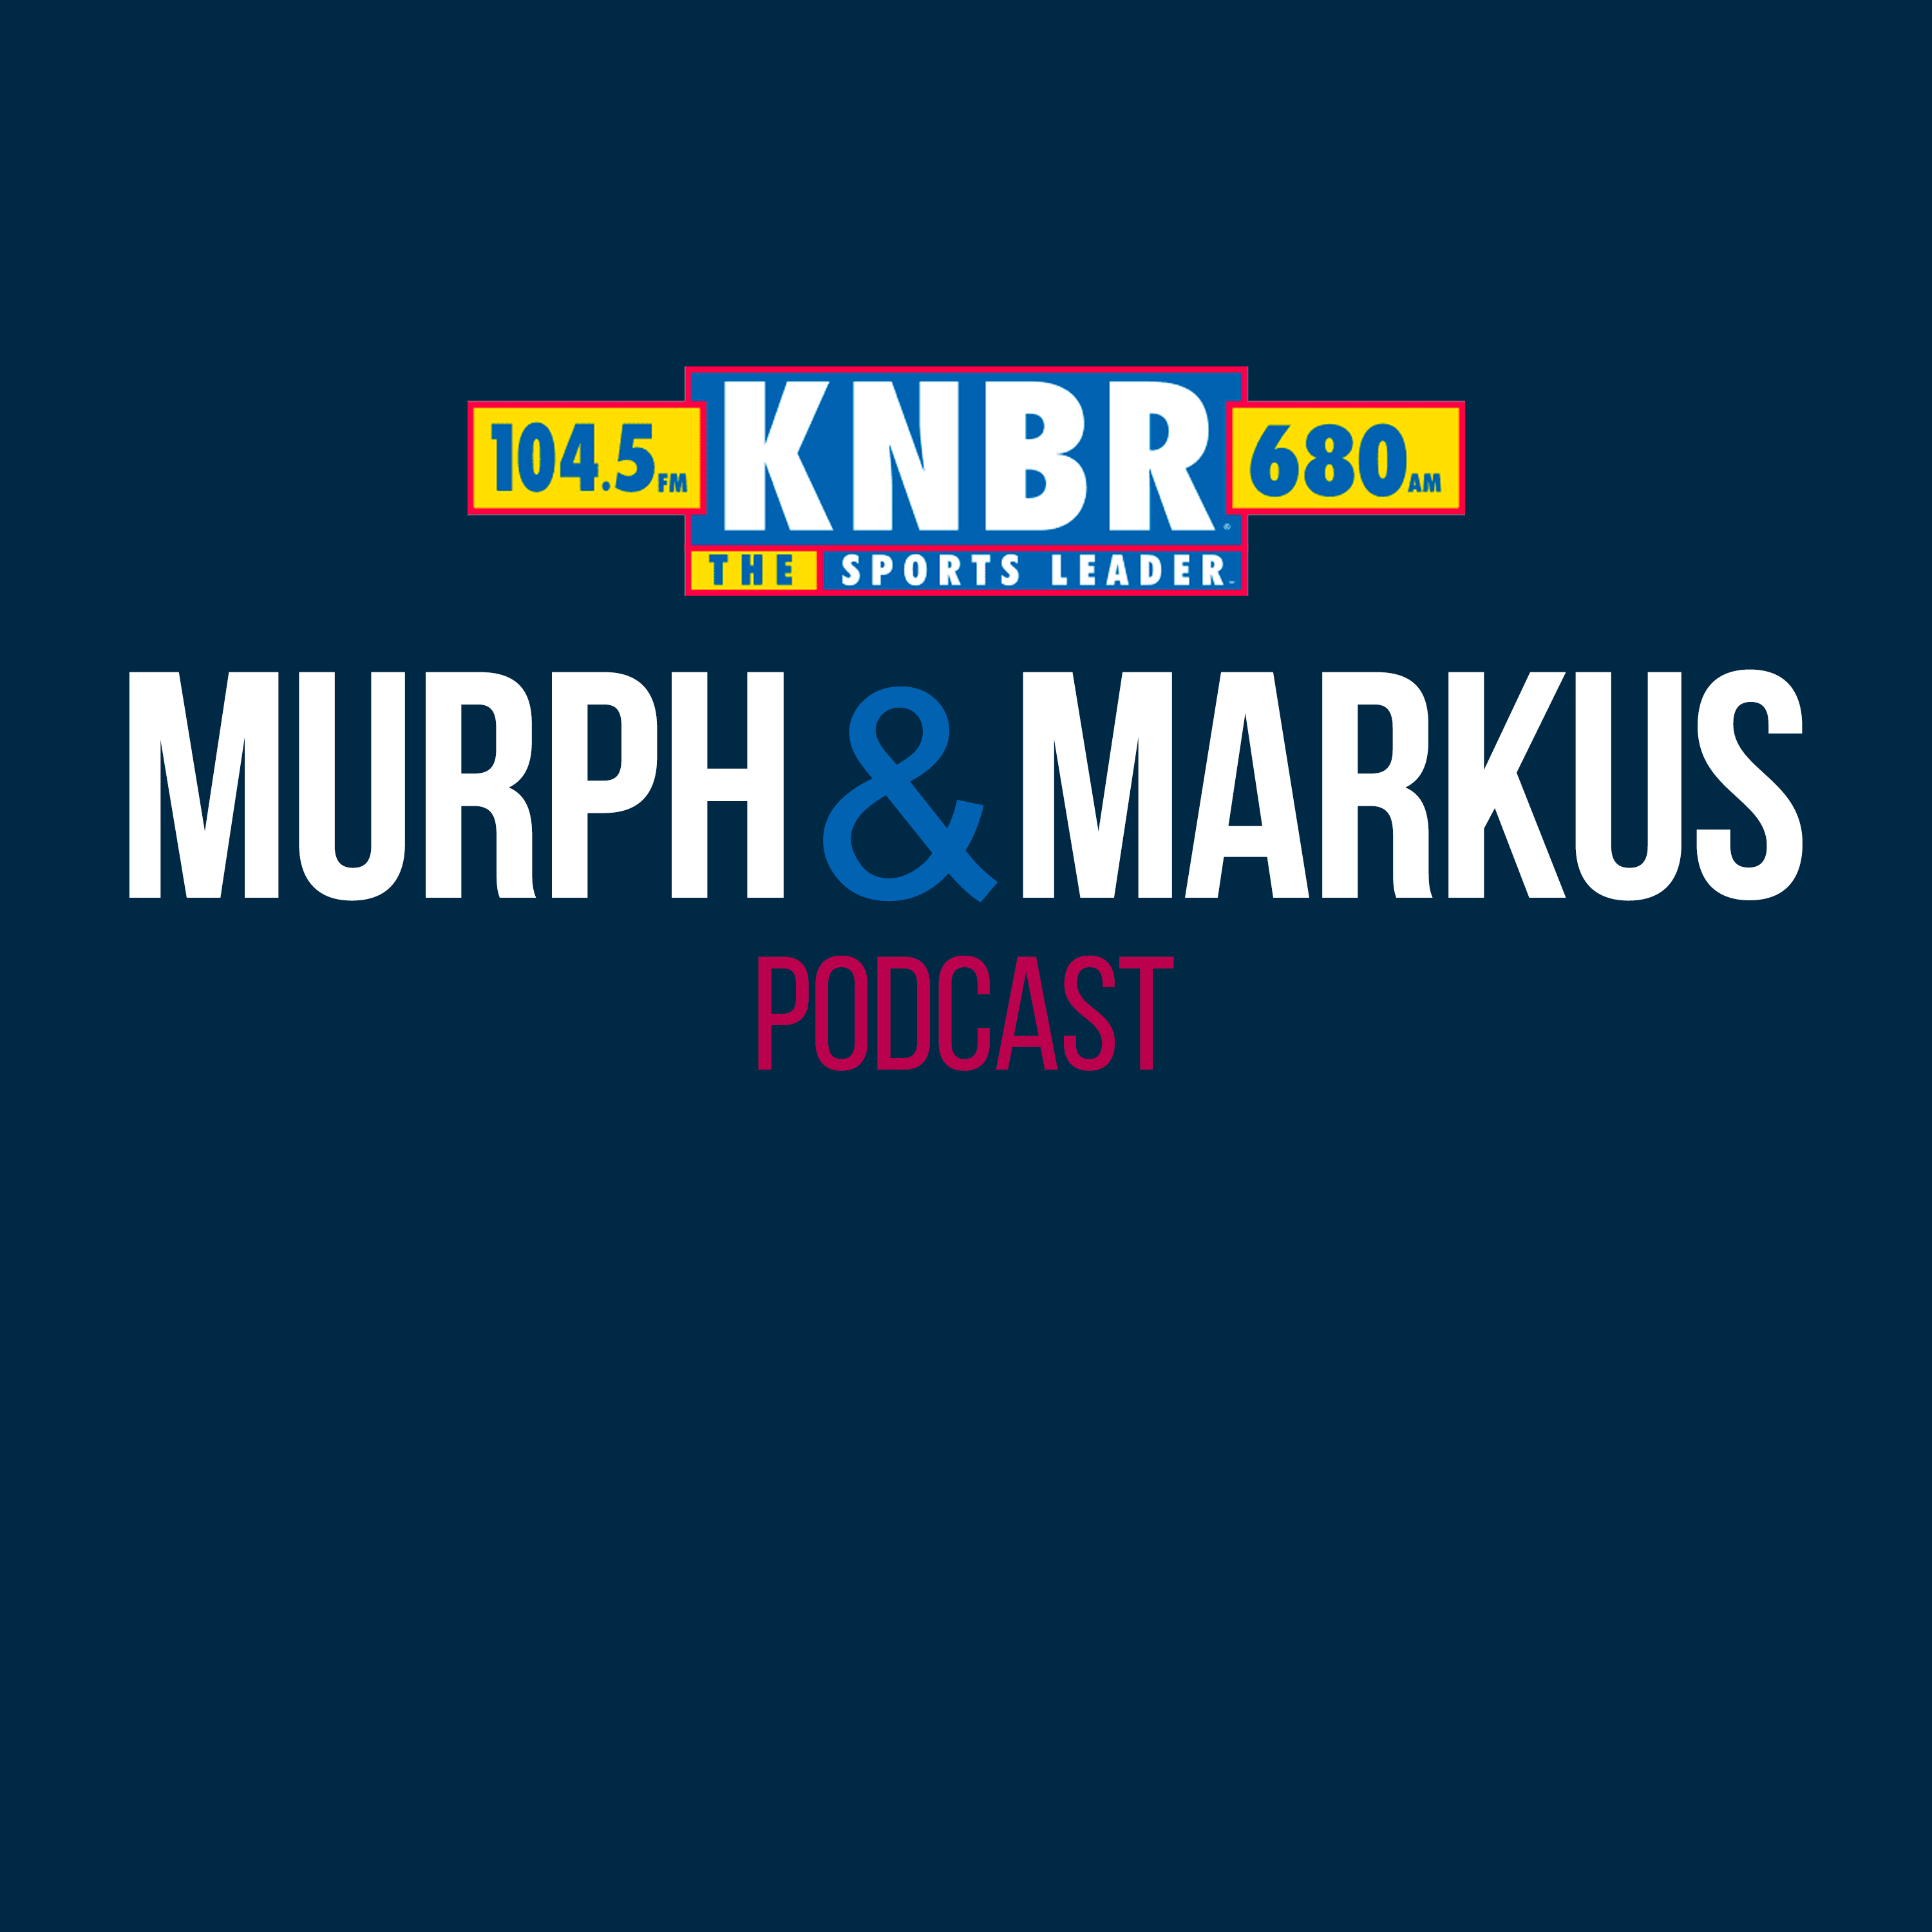 5-2 Shawn Estes joins Murph & Markus to discuss why the Giants decided to go with Daulton Jeffries over Mason Black in yesterday's game